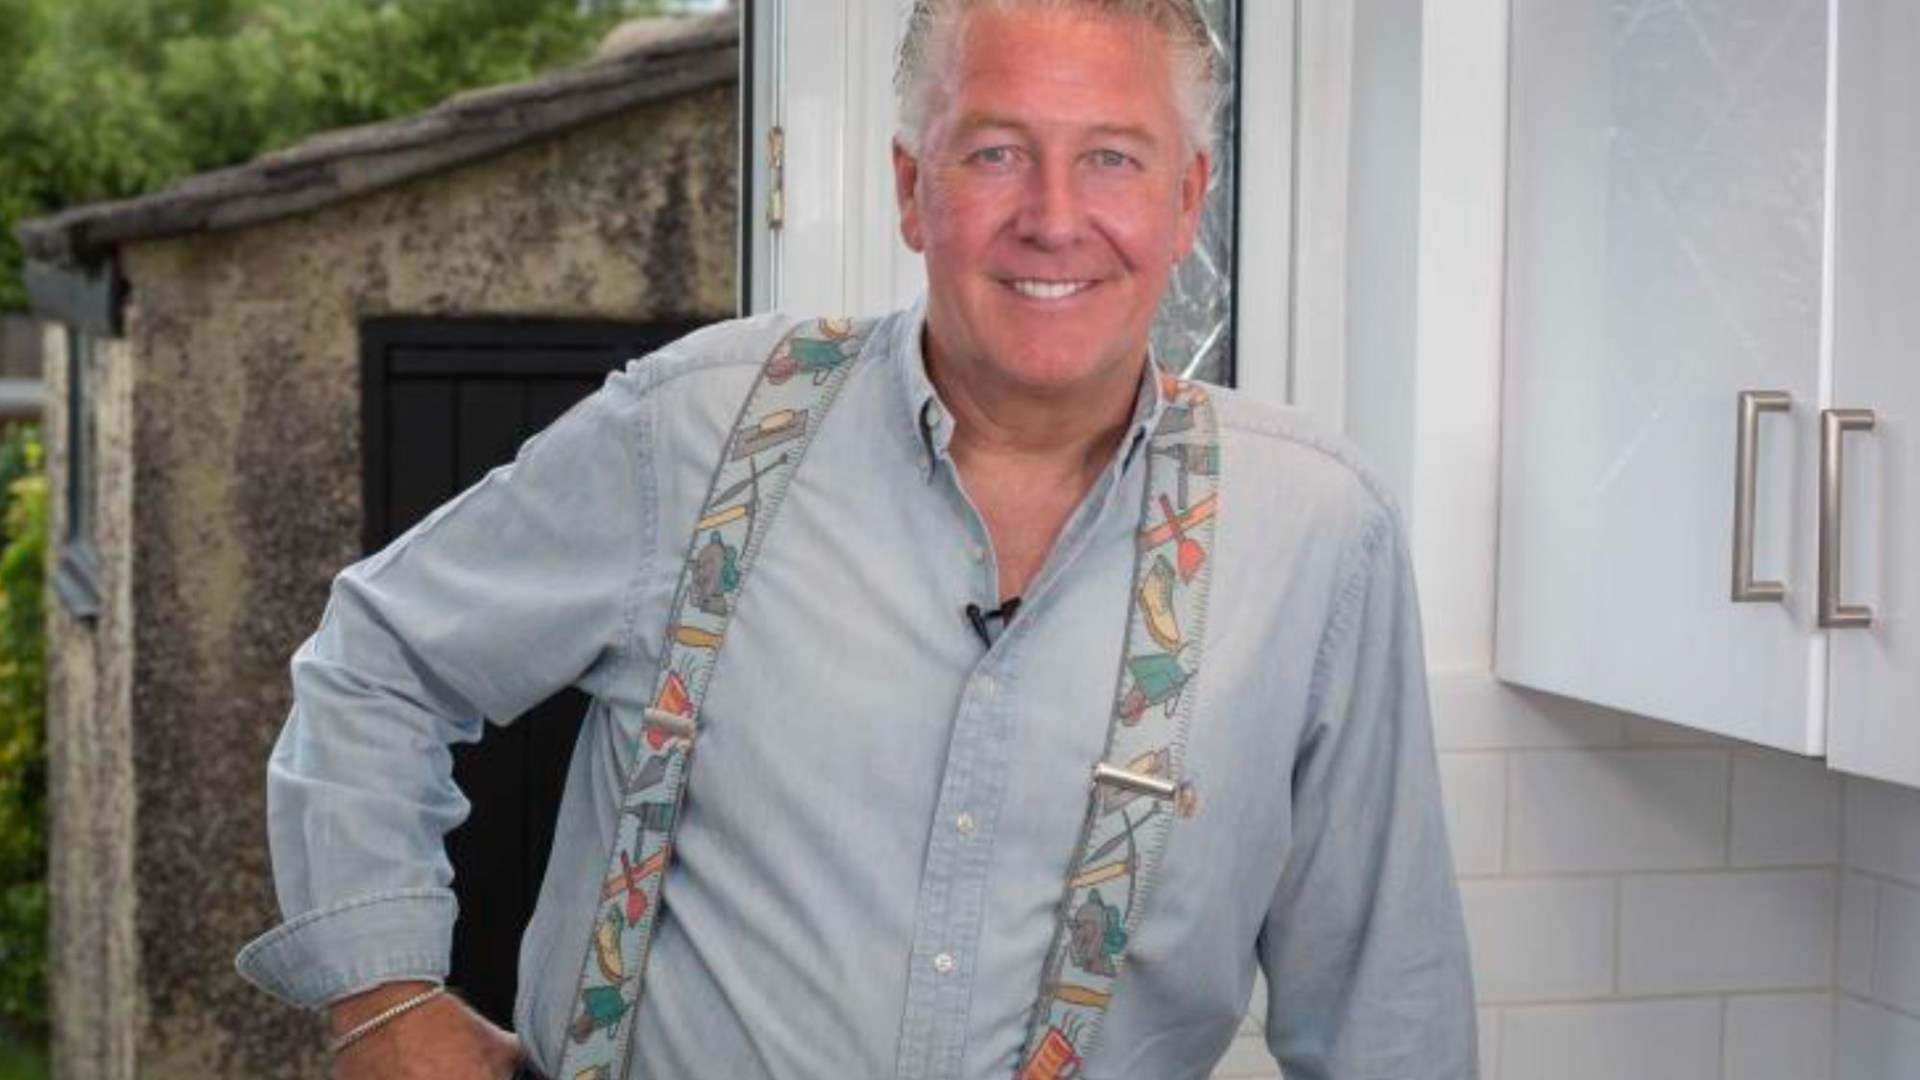 Homes Under The Hammer star Tommy Walsh shares health update amid new cancer treatment [Video]